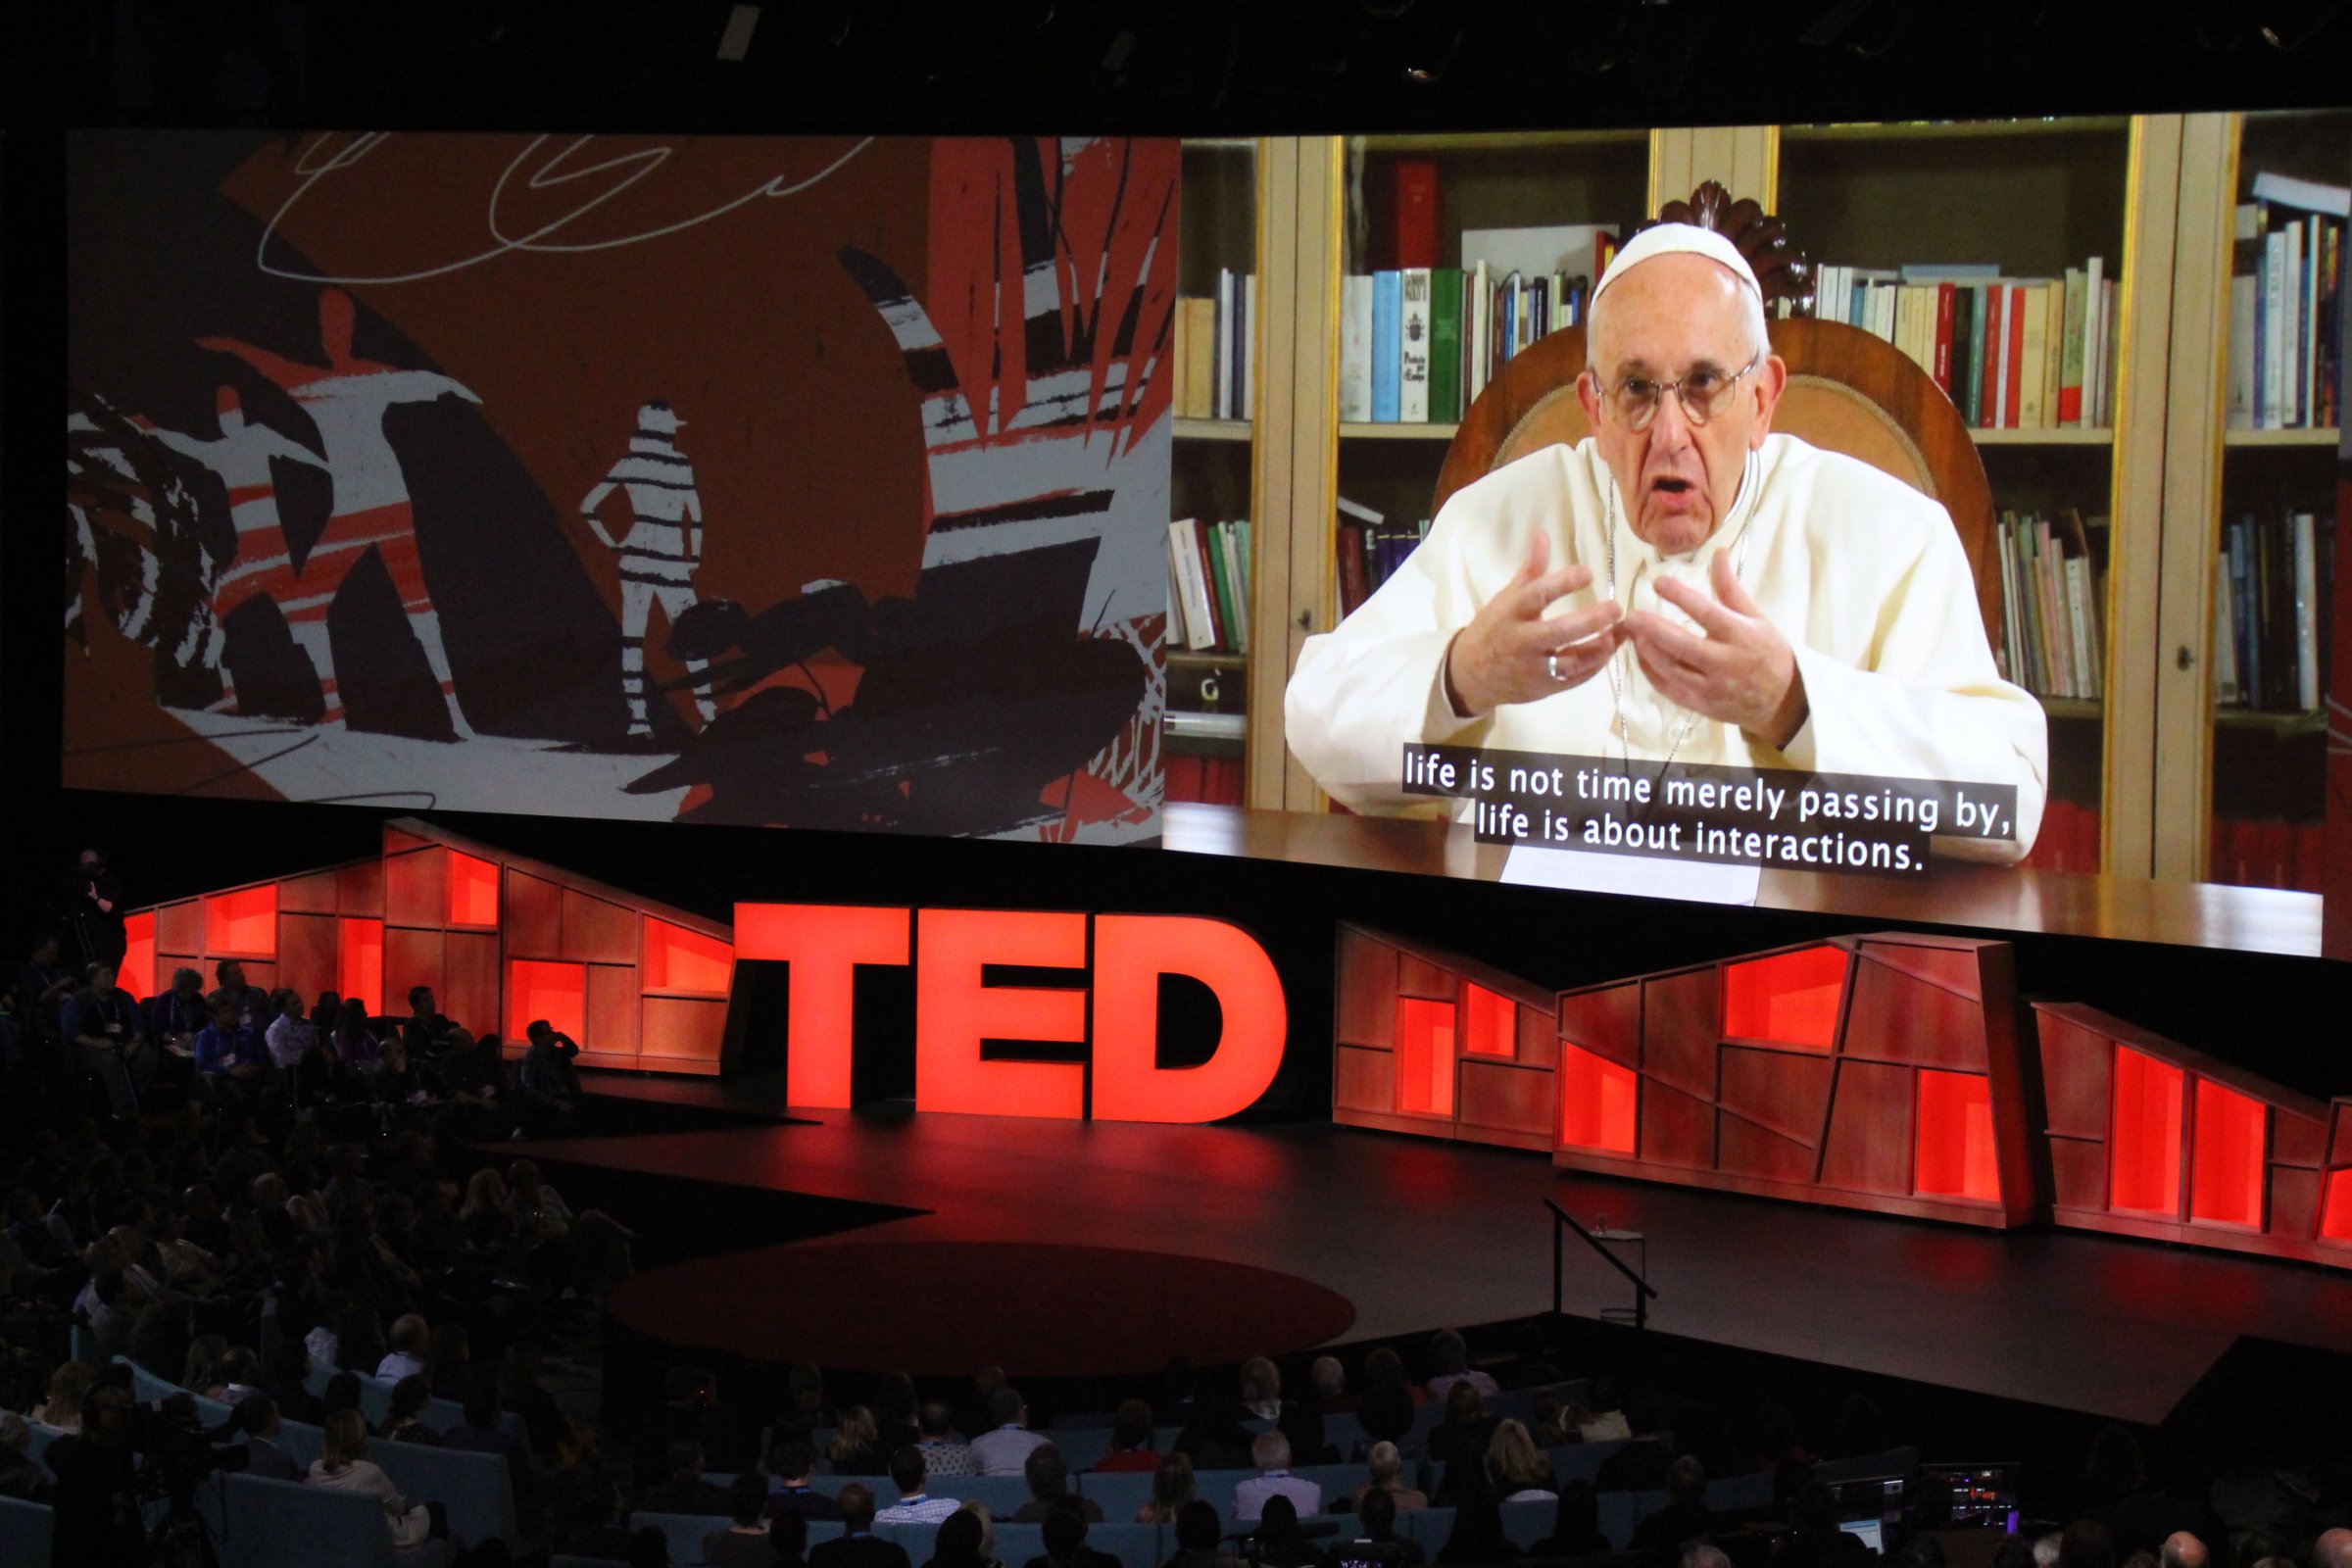 US-CANADA-RELIGION-INTERNET-COMPUTERS-TED-POPE